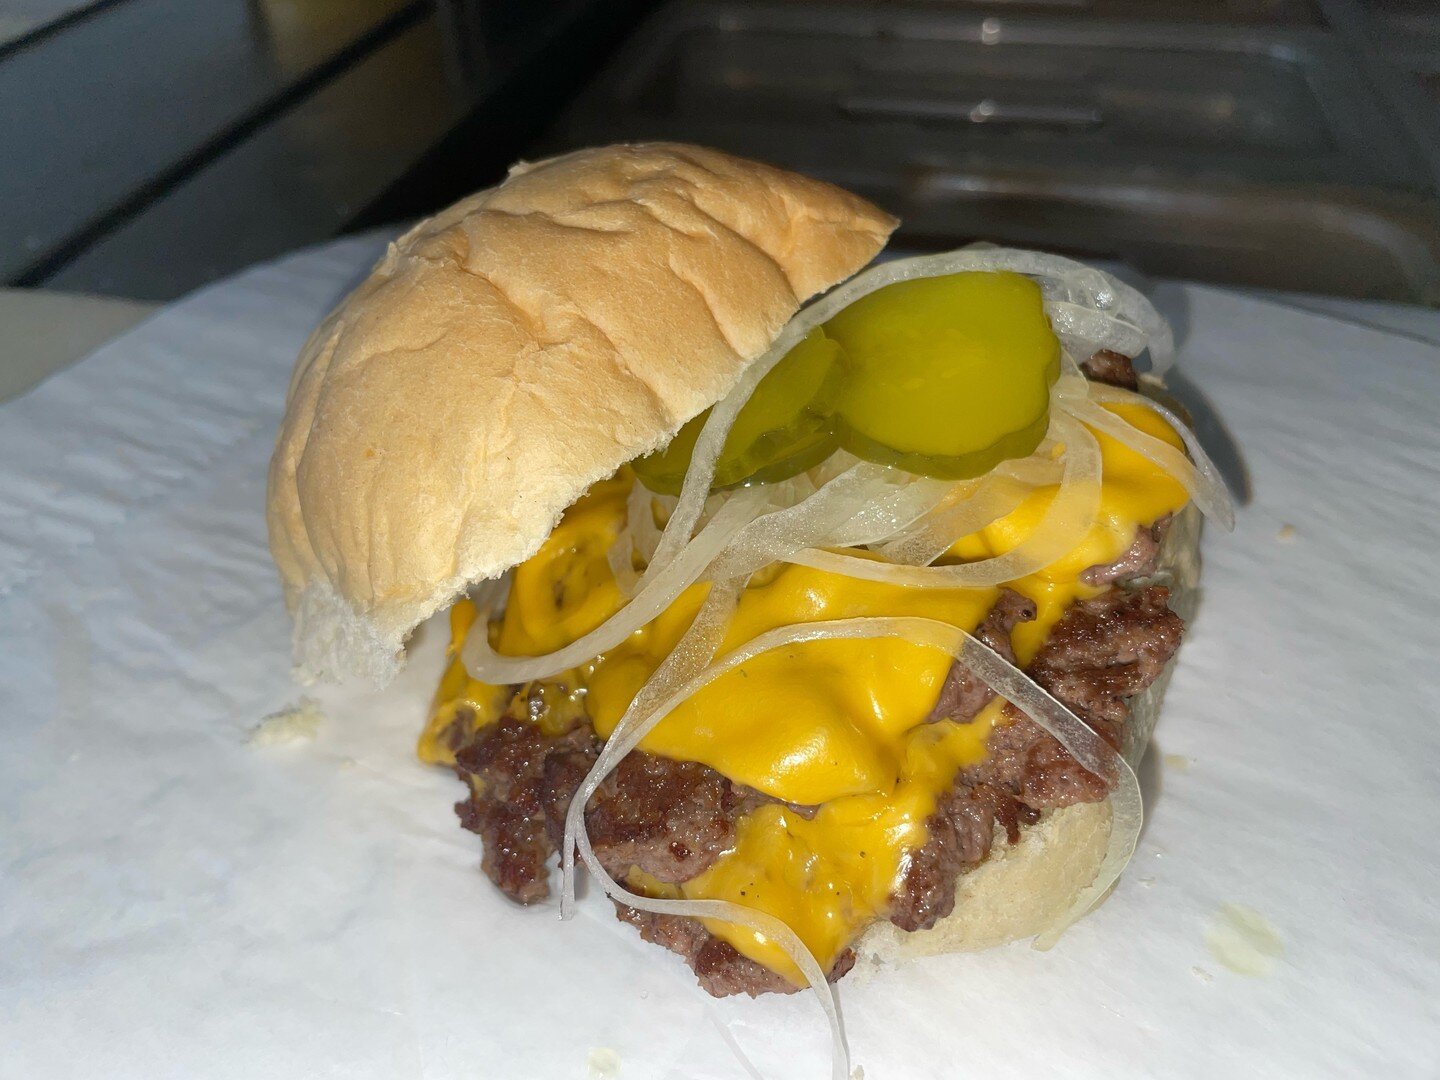 Cheeseburger Cheeseburger Tuesday! Grab one for lunch or dinner, but grab one before they're gone!

#vinnies #stl #eatstl #foodie #stlouisfoods #stlfoods #greek #italian #lindenwoodpark #sandwiches #special #lunch #dinner #smallbusiness #local #sandw